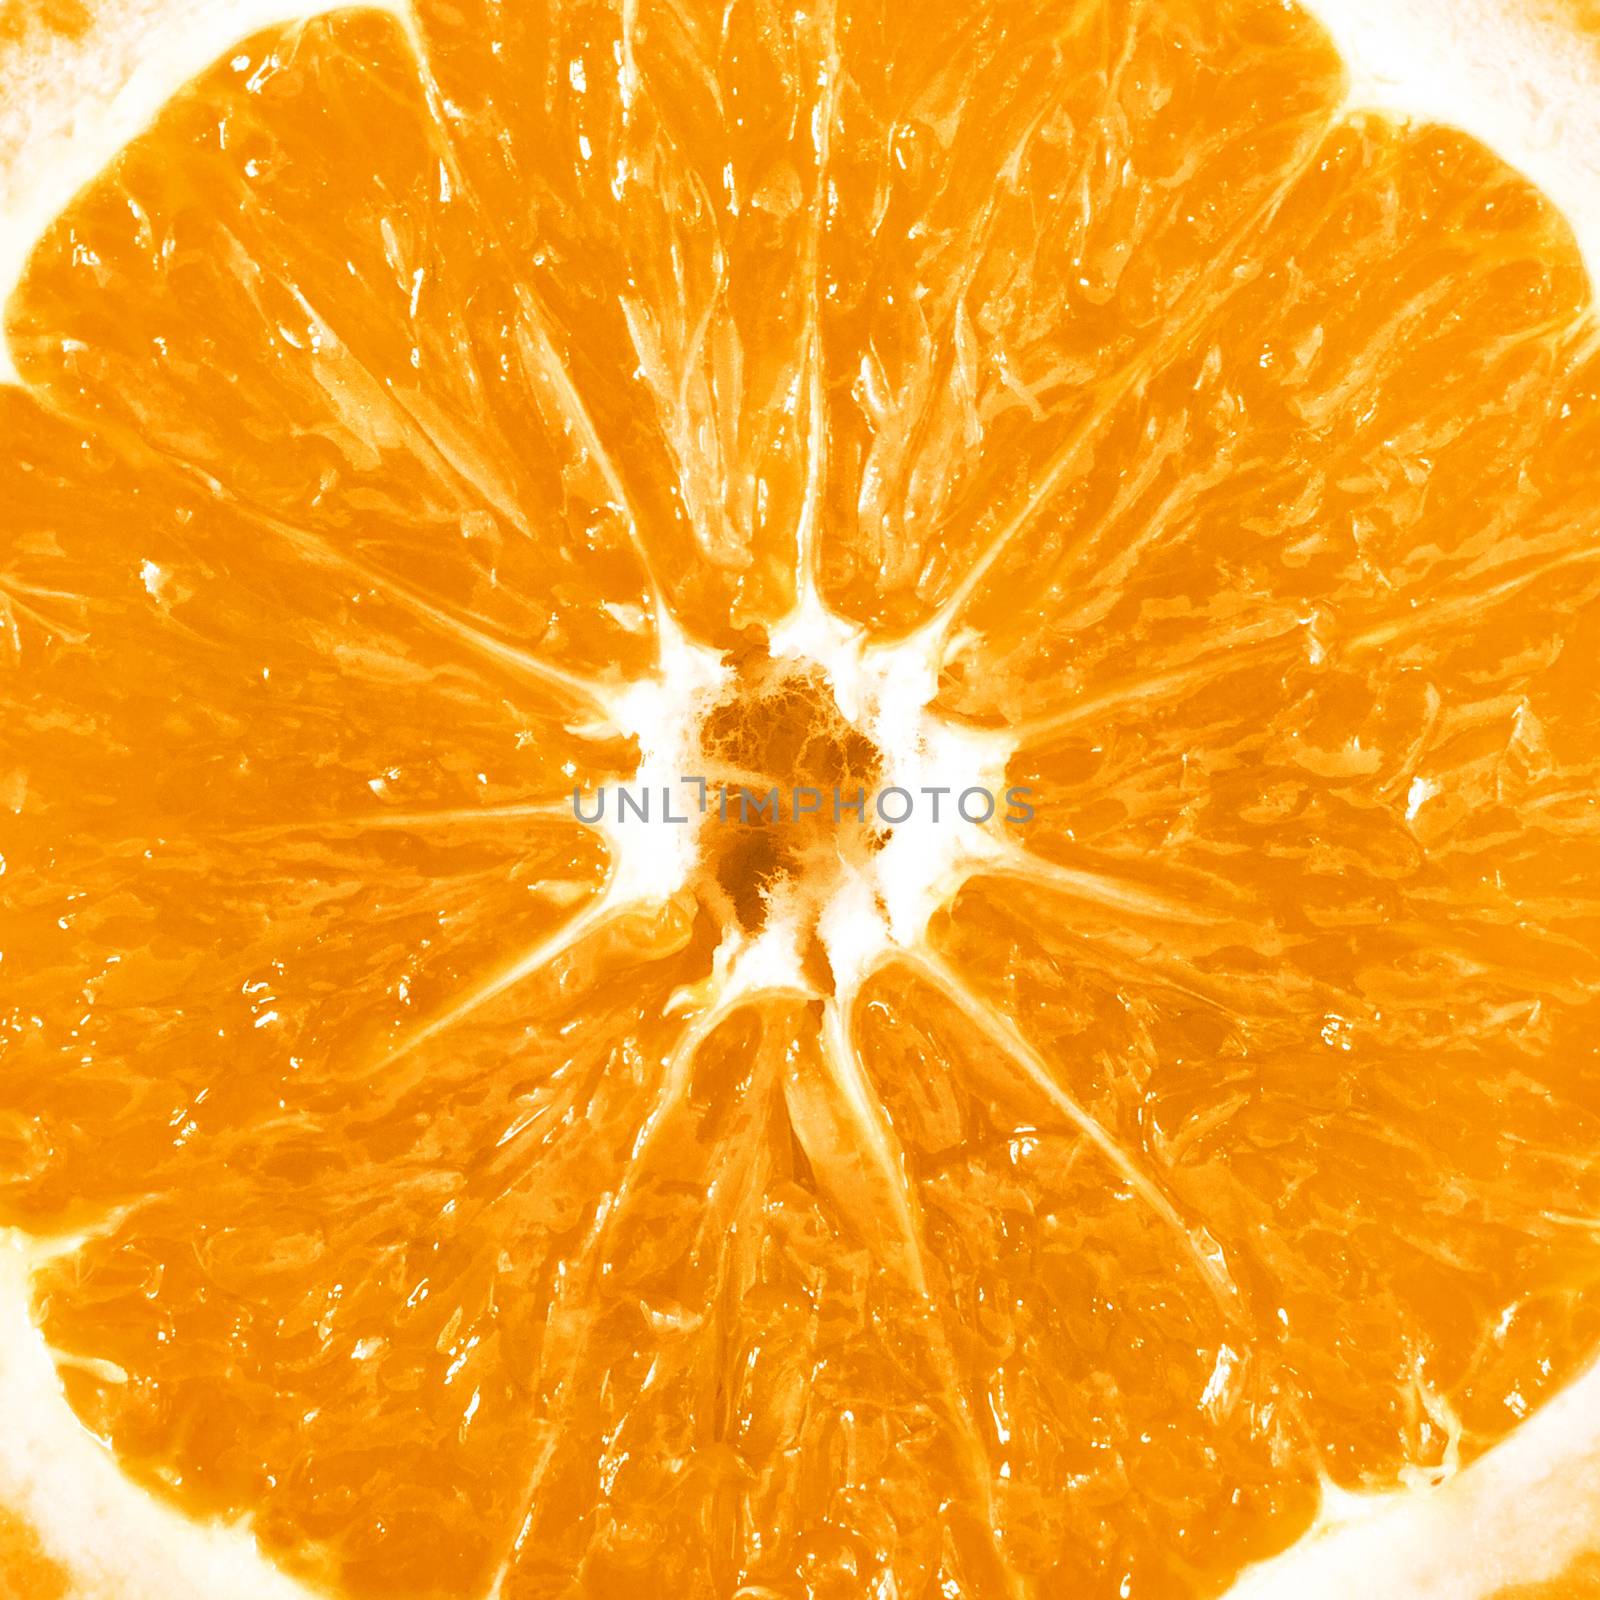 Details of skin and texture of a orange slice. Extreme close-up. Ideas for background.